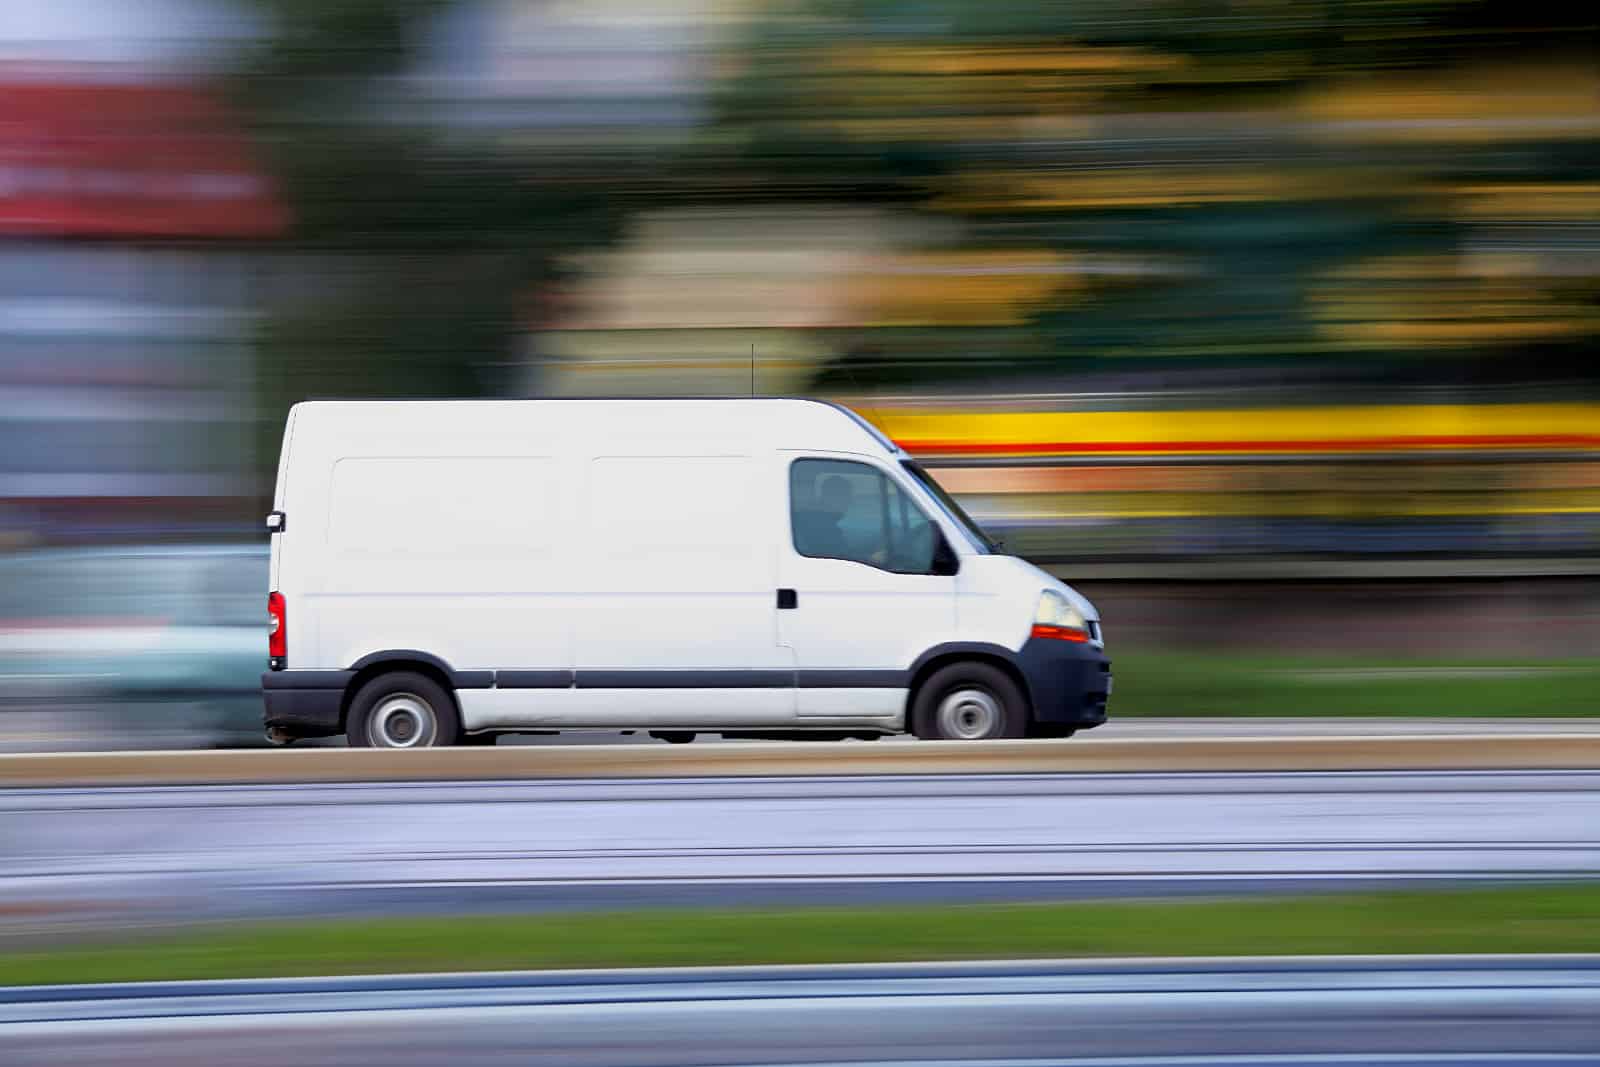 5 Common Misconceptions About Same-day Courier Services